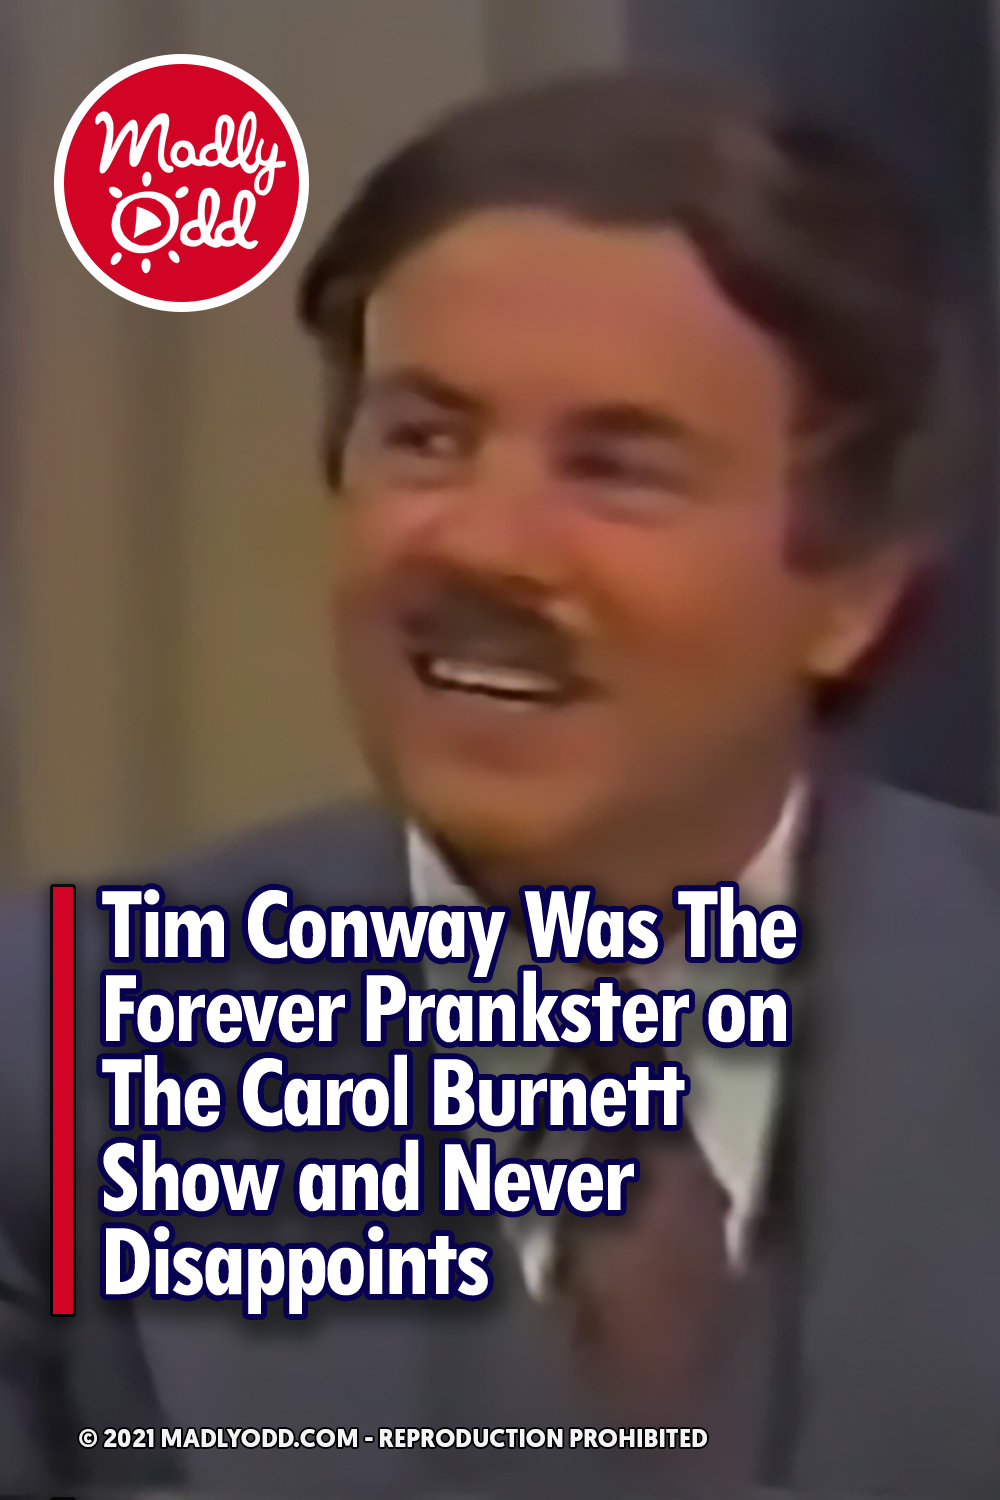 Tim Conway Was The Forever Prankster on The Carol Burnett Show and Never Disappoints